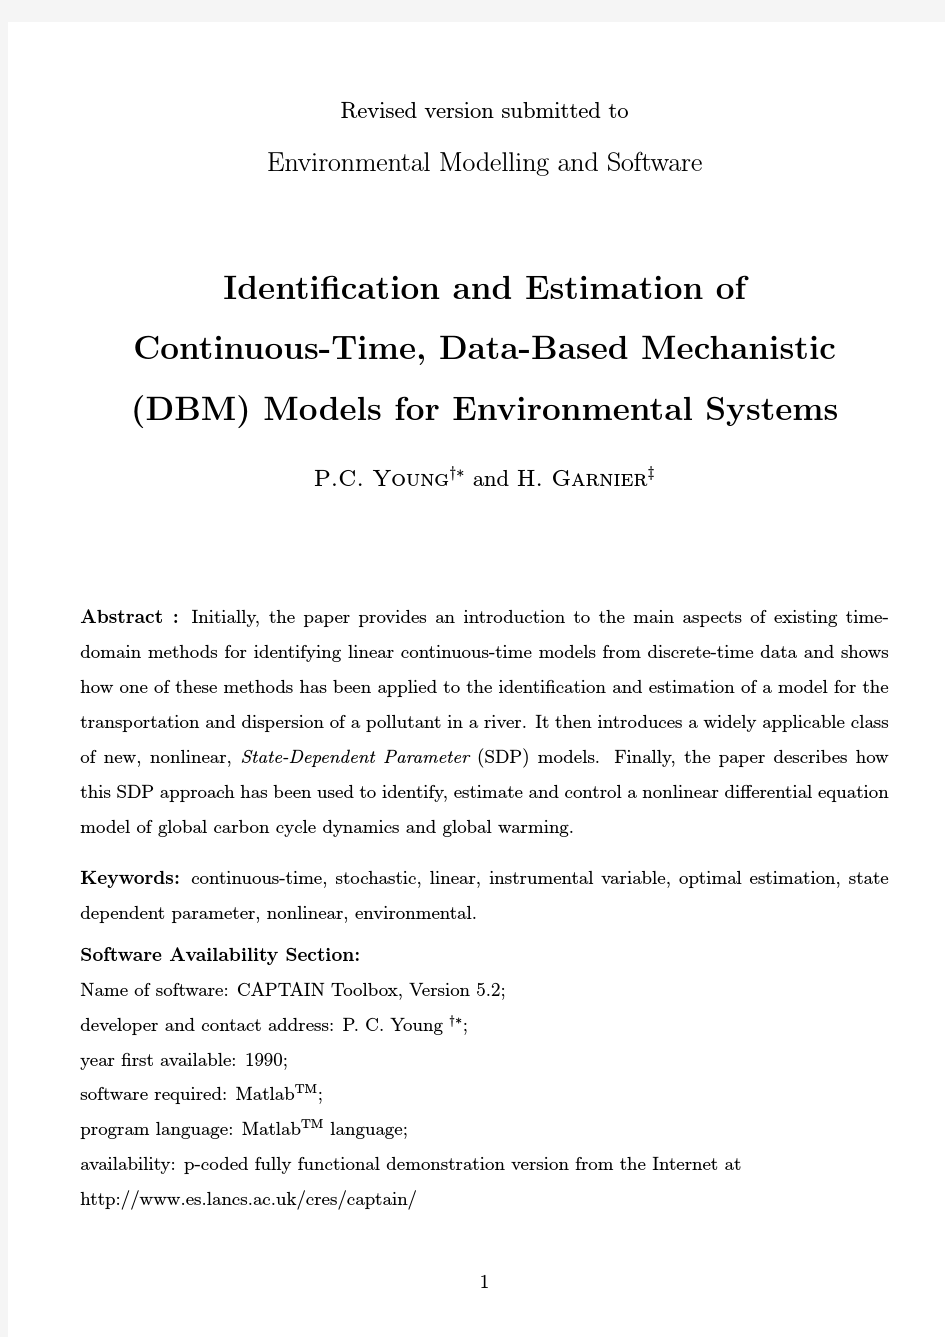 Identification and estimation of continuous-time